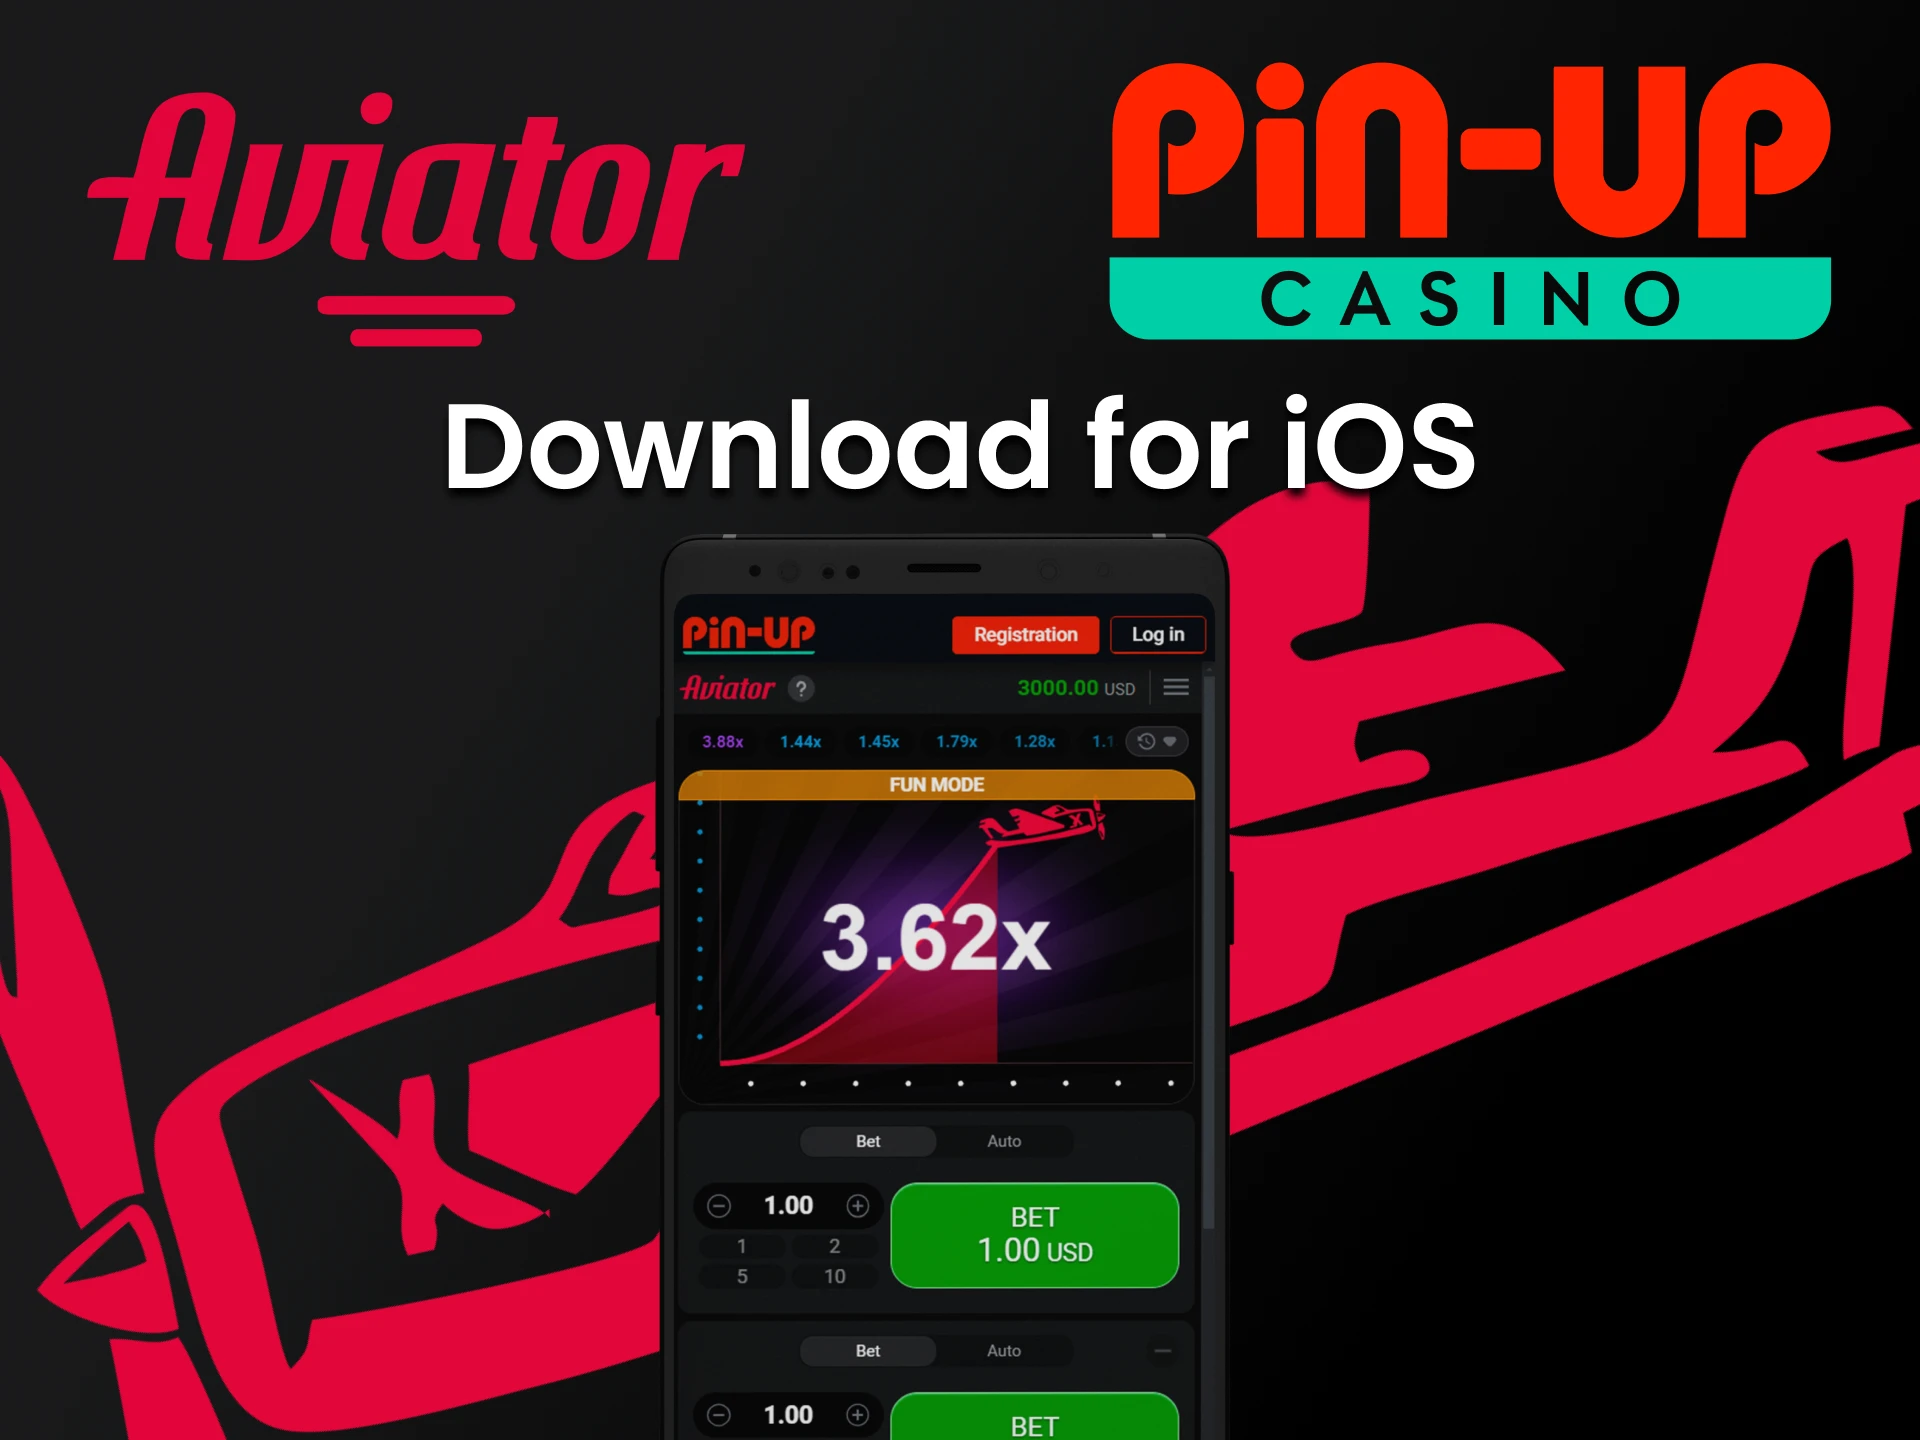 Download the Pin Up app for iOS to play Aviator.